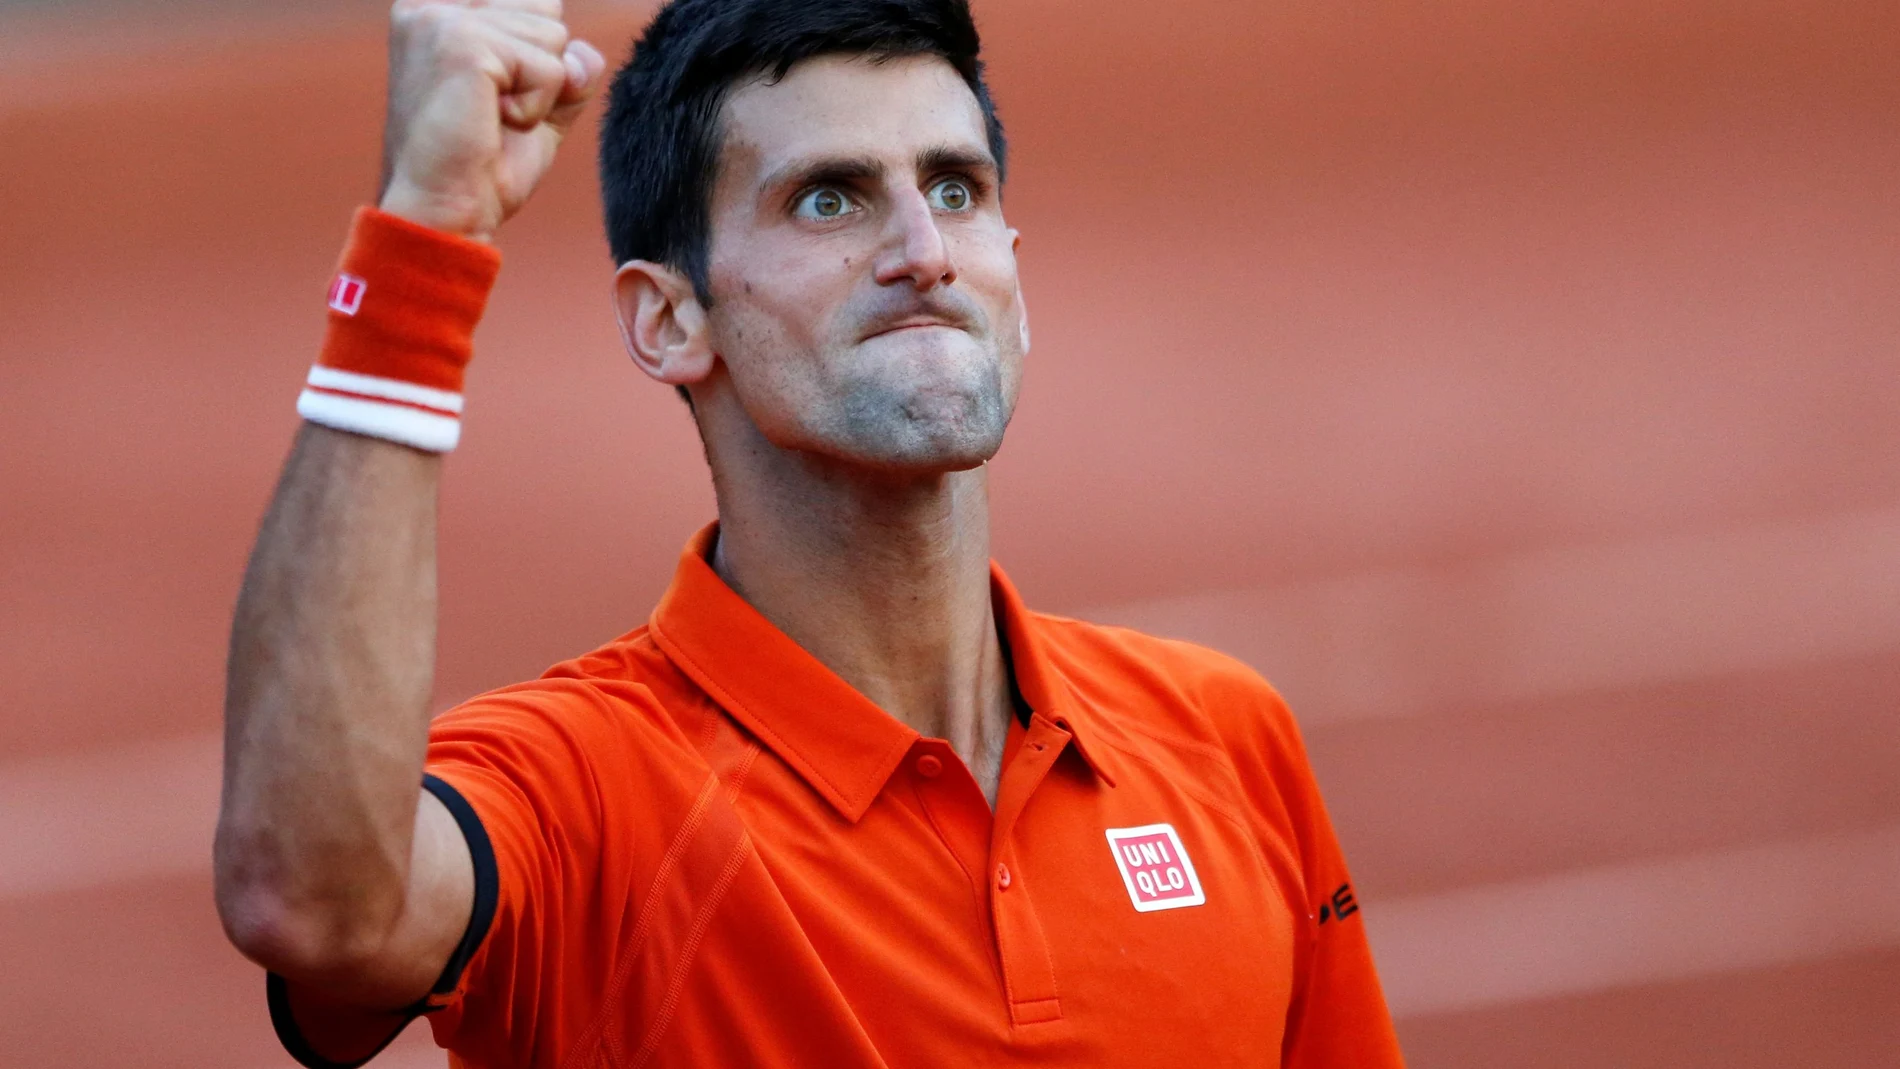 FILE PHOTO: Novak Djokovic celebrates after his 6-3 6-3 5-7 5-7 6-1 victory over Andy Murray in the French Open semi-final.